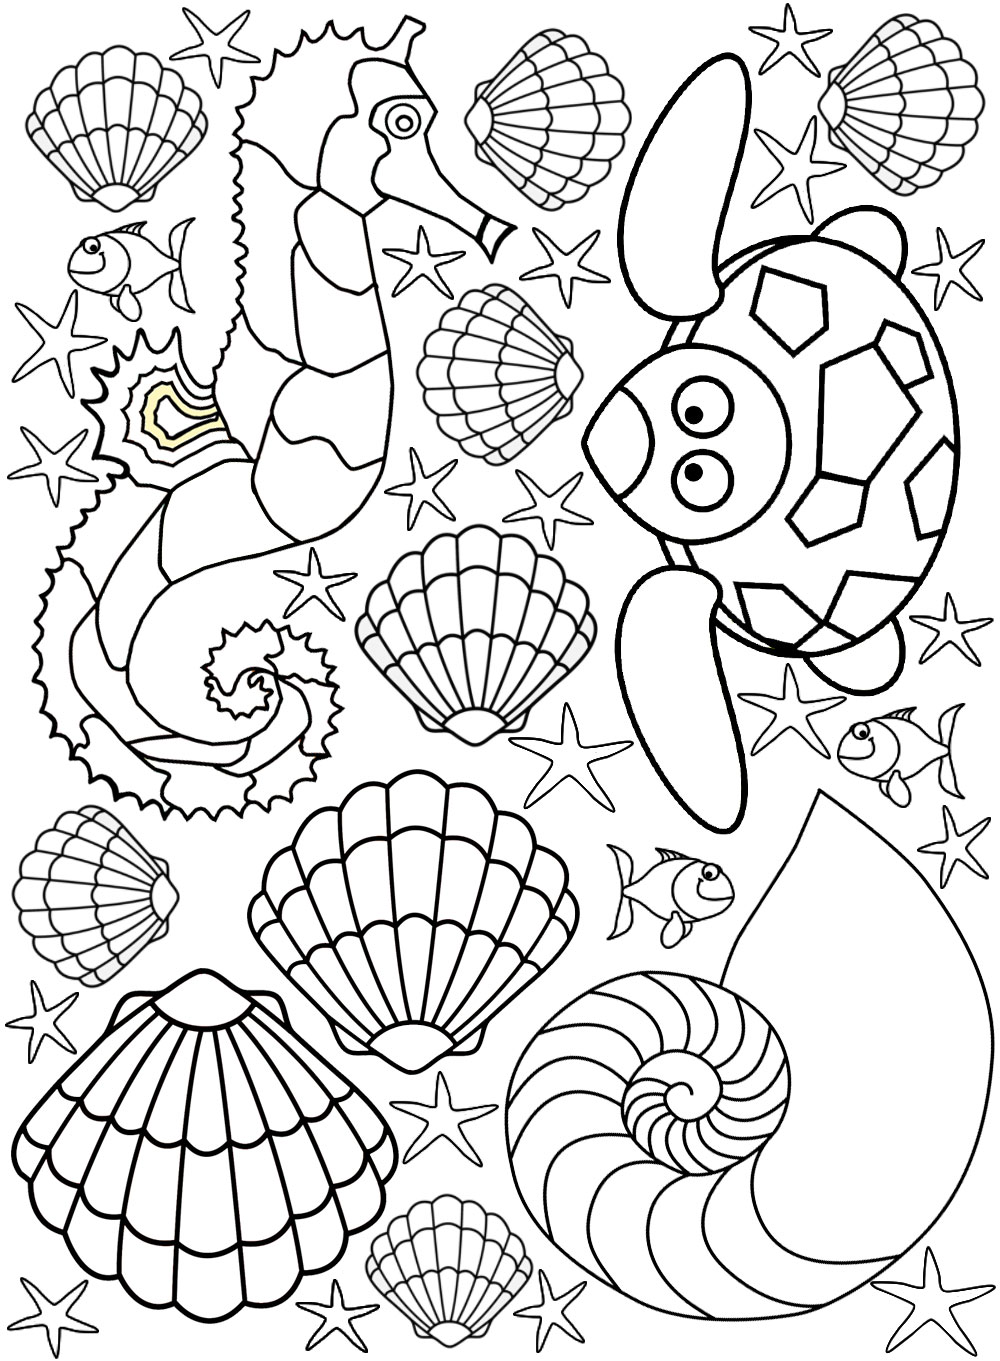 Hudtopics: Printable Coloring Pictures